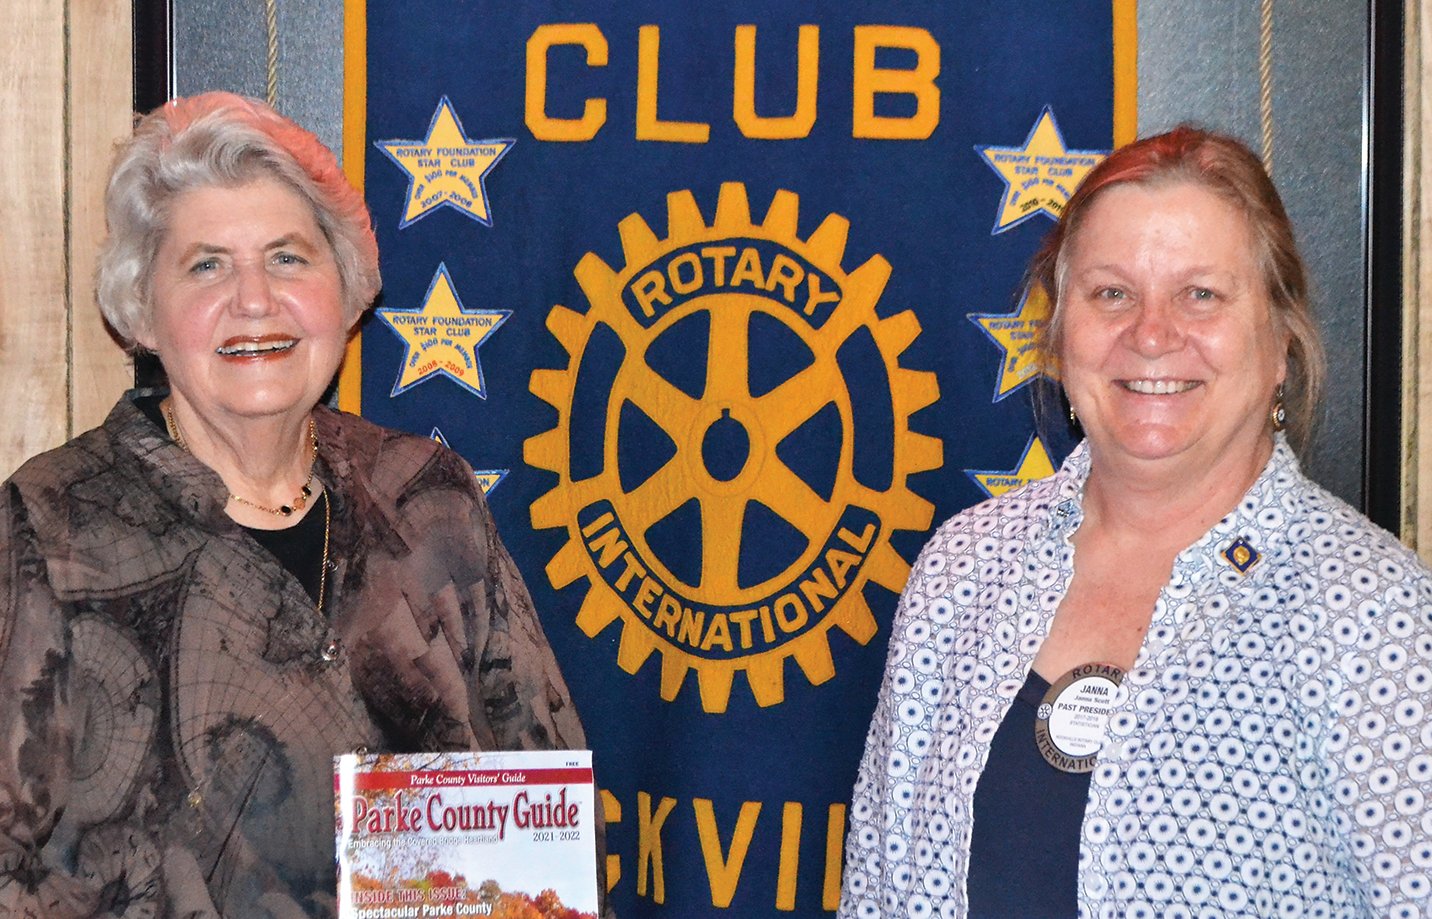 The Rockville Rotary Club recently hosted Jean Turnmire, left, owner of the Wilkins Mill Guest House located in Parke County near Bloomingdale, at their meeting held in the banquet room at the Thirty-Six Saloon in Rockville. On the right is current Rockville Rotary president Janna Scott. Turnmire discussed the history of the now gone Wilkins Mill and the current covered bridge in the same area that bears the name. The main cabin at the guest house started out as a general store in 1828 and is right next to the Wilkins Mill covered bridge. Over many years the main cabin has been expanded into a guest house with all the modern lodging conveniences for up to 12 guests and two other cabins have been added. More information is available on Facebook and on the website https://wilkinsmill.com.